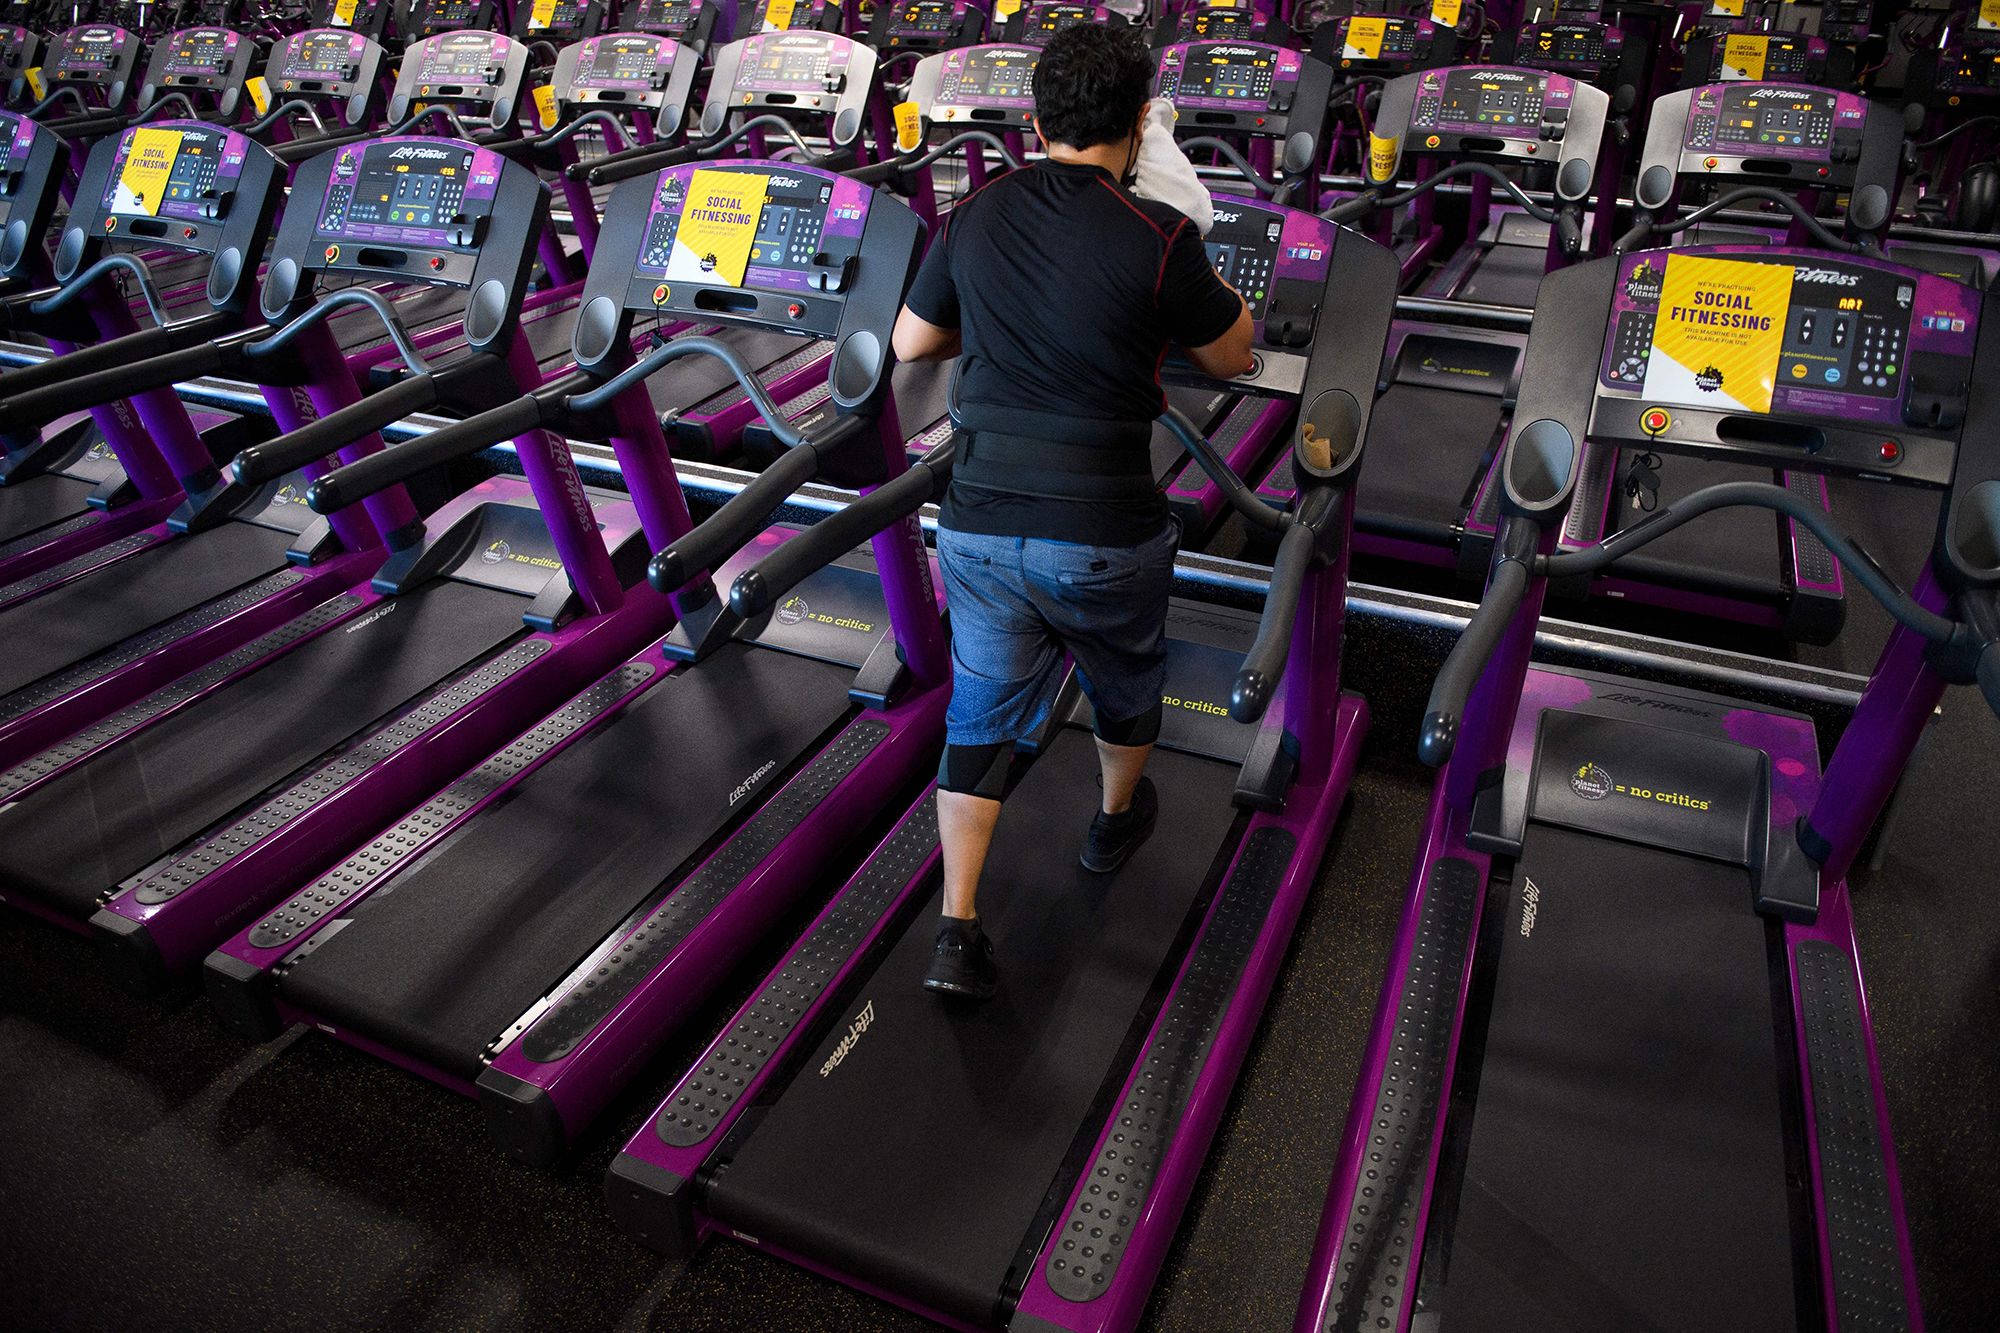 Google wants to help more people hit the gym